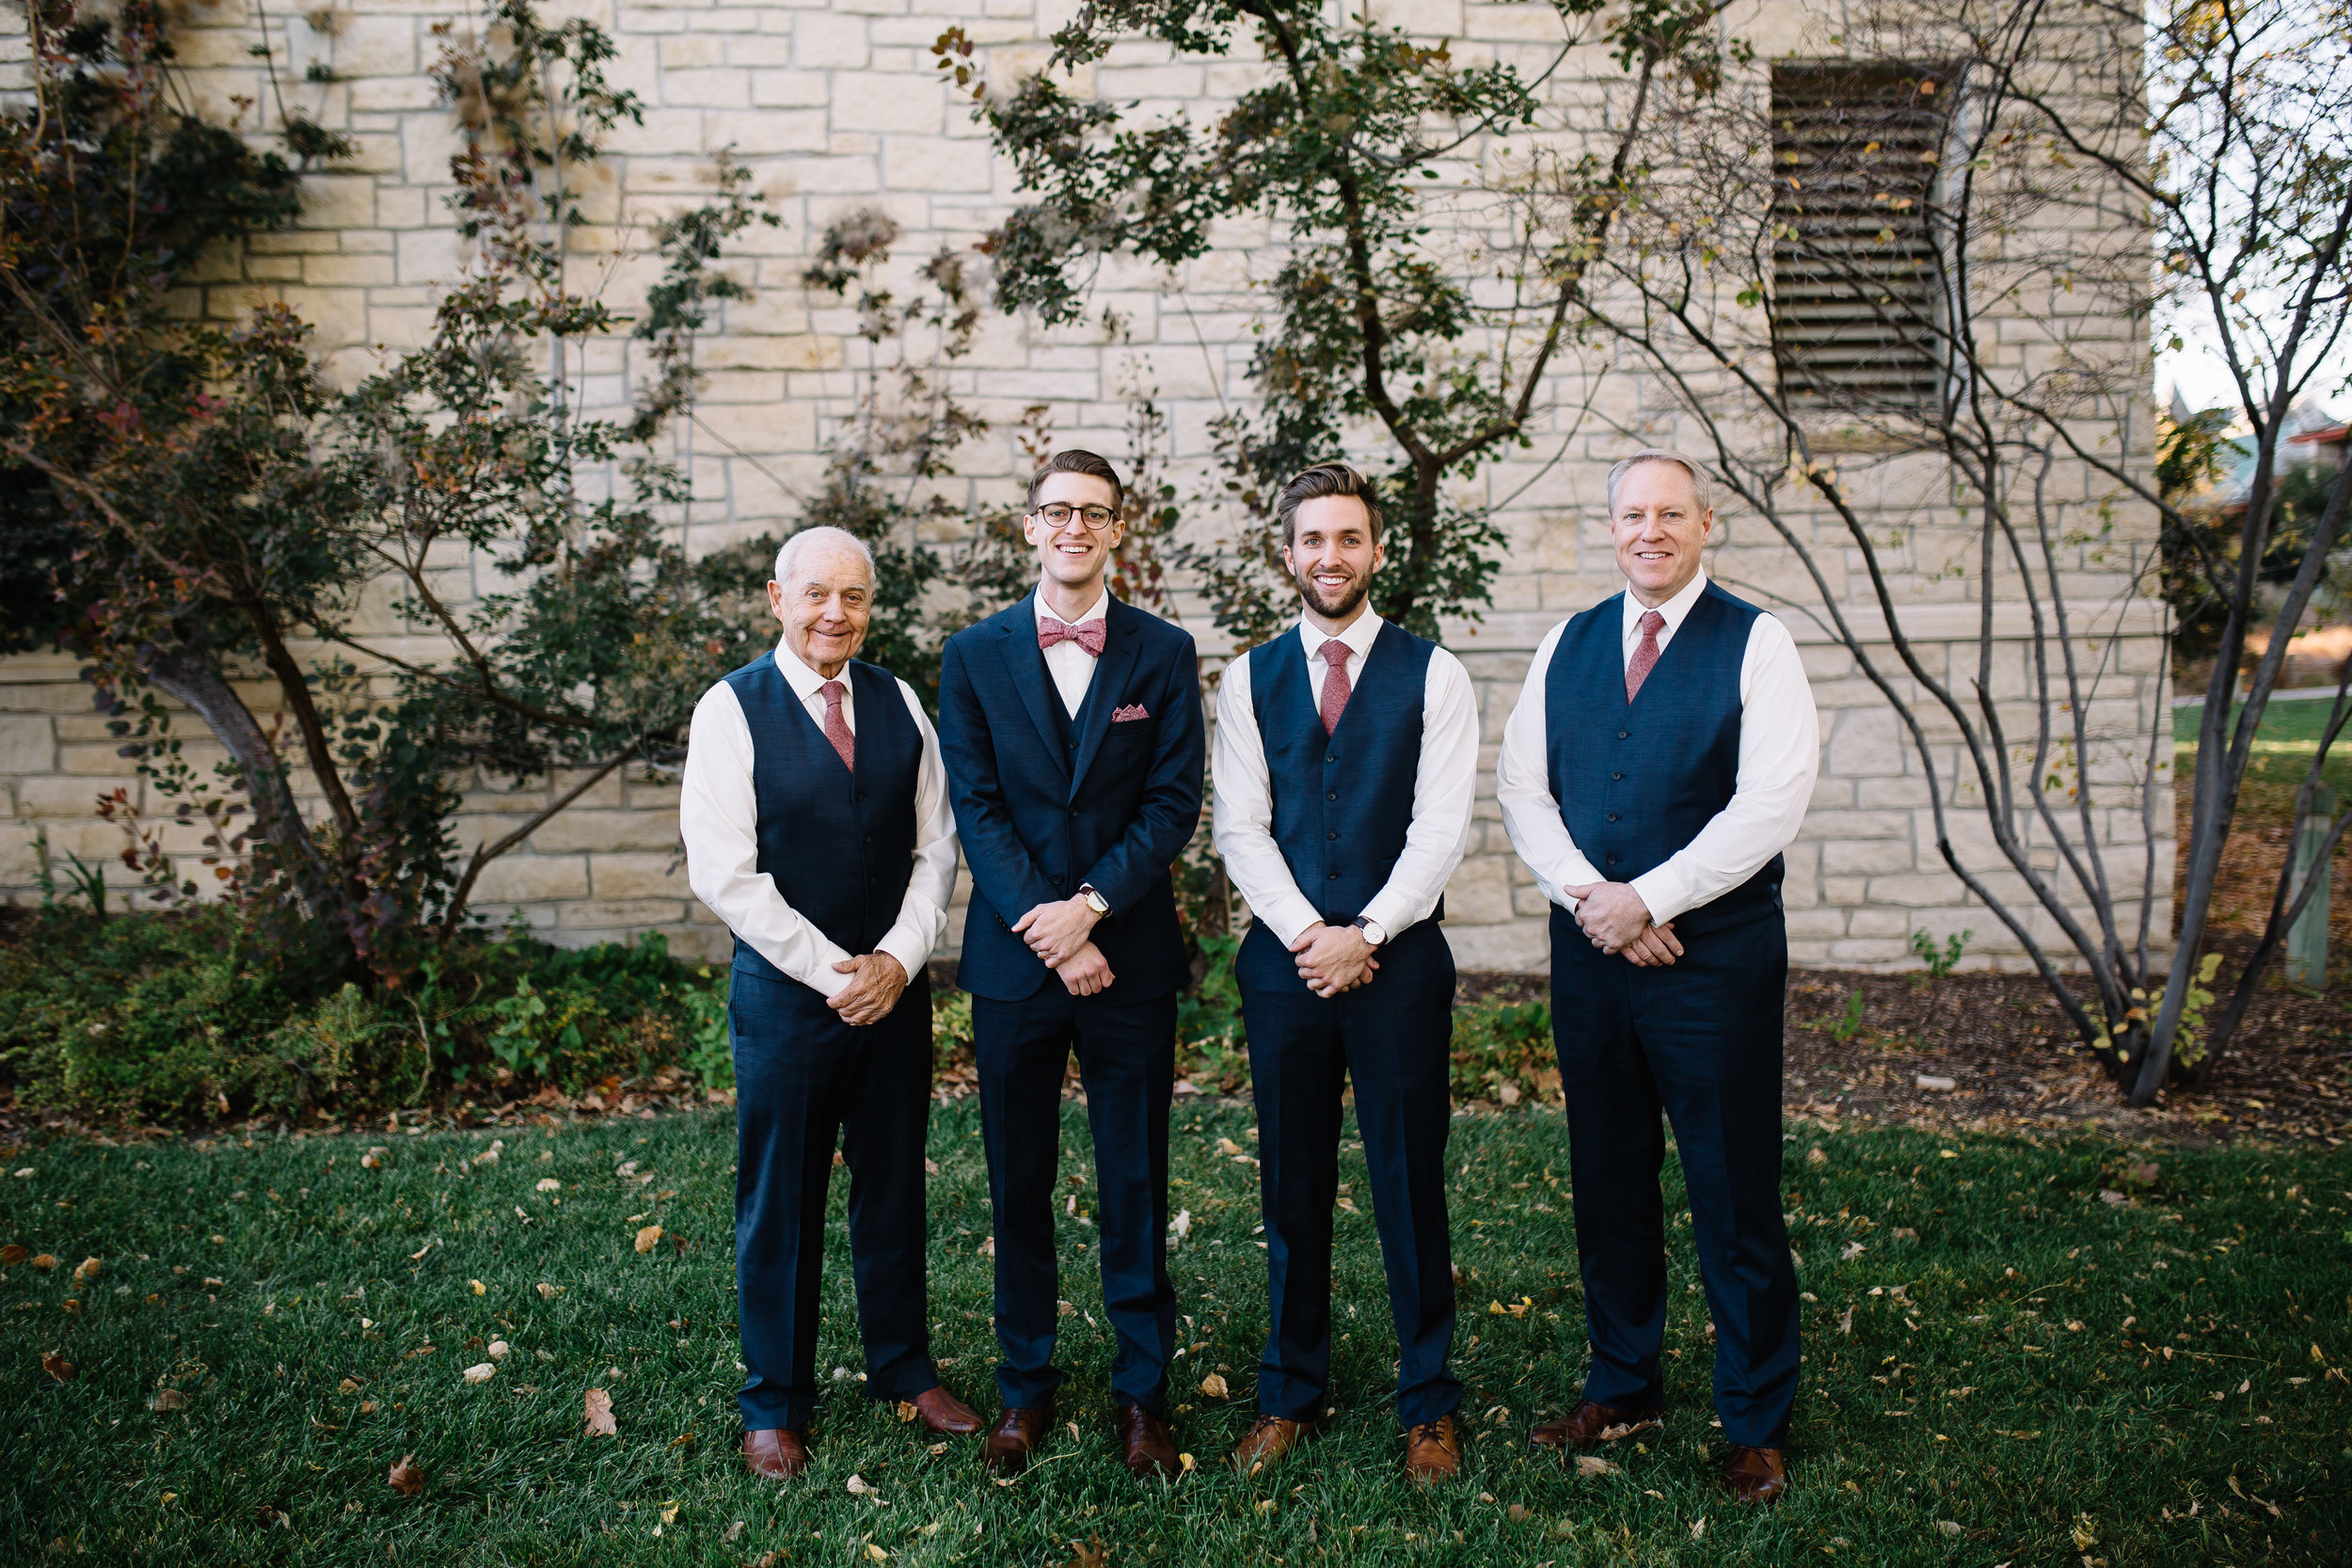  When your groom picks his groomsmen to be his big brother, father and grandpa - your heart kind of melts a bit. 